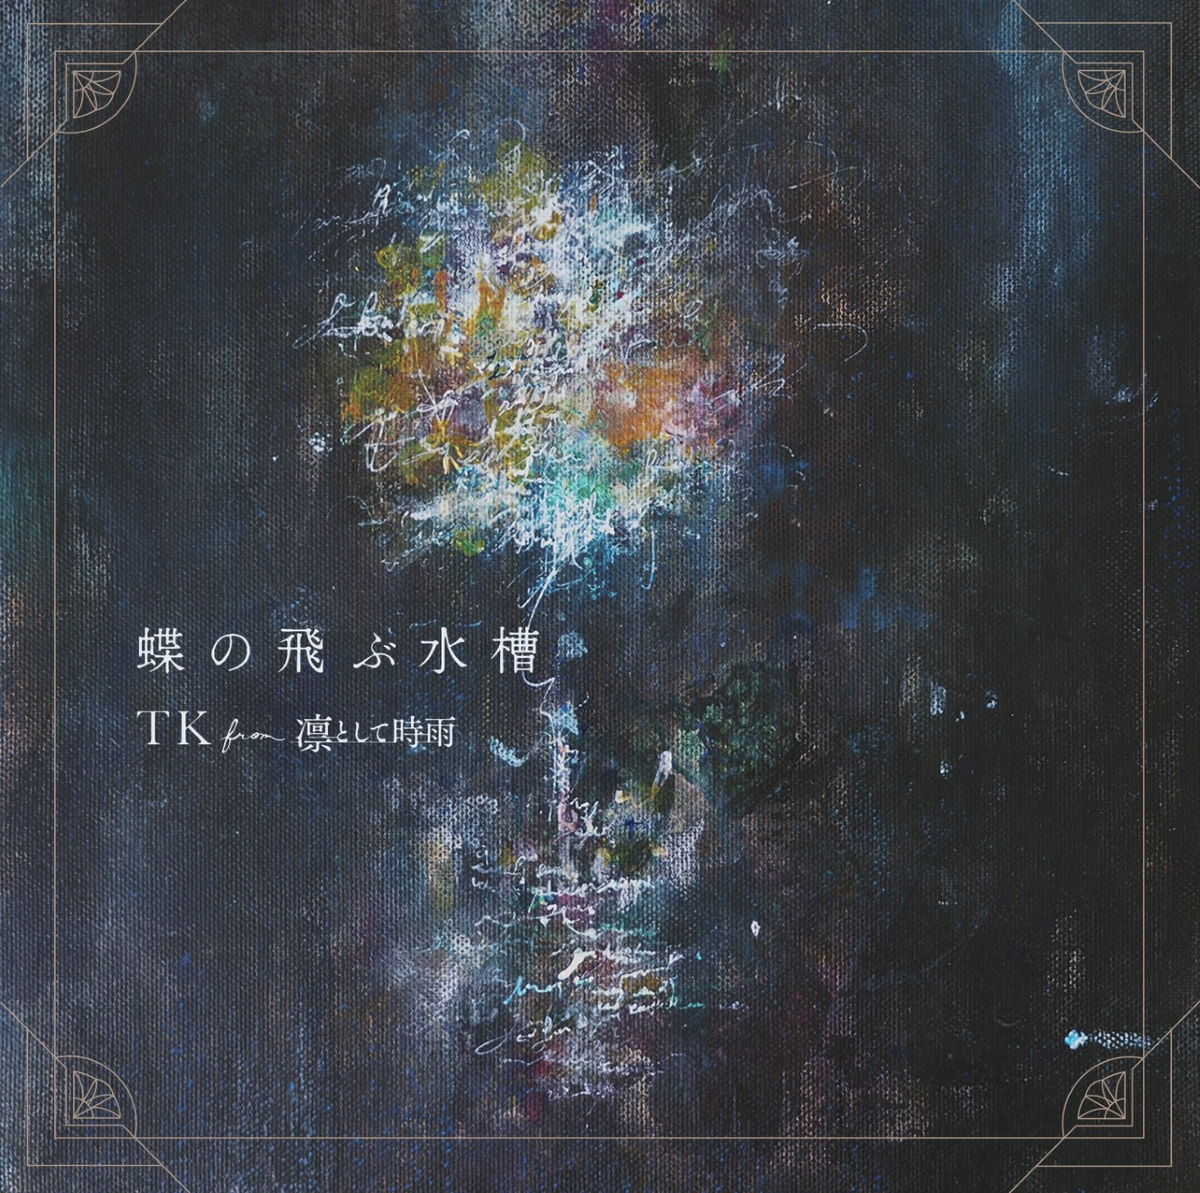 Cover for『TK from Ling tosite sigure - Chou no Tobu Suisou』from the release『Chou no Tobu Suisou』